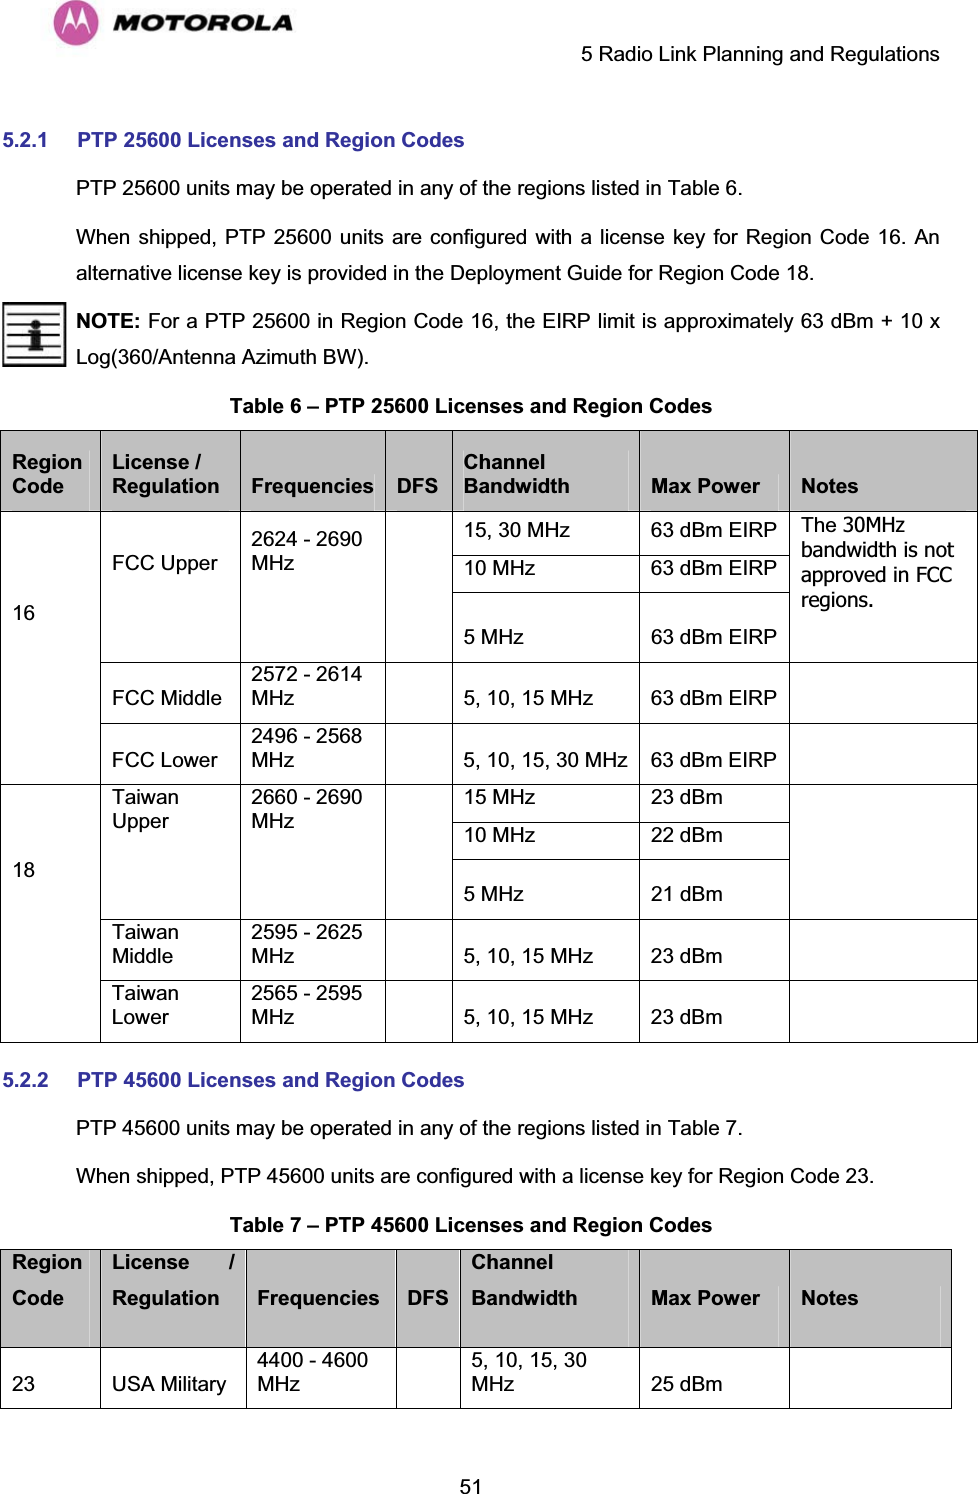     5 Radio Link Planning and Regulations  515.2.1 PTP 25600 Licenses and Region Codes PTP 25600 units may be operated in any of the regions listed in Table 6. When shipped, PTP 25600 units are configured with a license key for Region Code 16. An alternative license key is provided in the Deployment Guide for Region Code 18.  NOTE: For a PTP 25600 in Region Code 16, the EIRP limit is approximately 63 dBm + 10 x Log(360/Antenna Azimuth BW). Table 6 – PTP 25600 Licenses and Region Codes RegionCodeLicense / Regulation  Frequencies DFSChannel Bandwidth  Max Power  Notes15, 30 MHz  63 dBm EIRP 10 MHz  63 dBm EIRP FCC Upper     2624 - 2690 MHz            5 MHz  63 dBm EIRP The 30MHzbandwidth is not approved in FCC regions.    FCC Middle 2572 - 2614 MHz     5, 10, 15 MHz  63 dBm EIRP    16          FCC Lower 2496 - 2568 MHz     5, 10, 15, 30 MHz 63 dBm EIRP    15 MHz  23 dBm 10 MHz  22 dBm Taiwan Upper     2660 - 2690 MHz            5 MHz  21 dBm       Taiwan Middle 2595 - 2625 MHz     5, 10, 15 MHz  23 dBm    18         Taiwan Lower 2565 - 2595 MHz     5, 10, 15 MHz  23 dBm    5.2.2 PTP 45600 Licenses and Region Codes PTP 45600 units may be operated in any of the regions listed in Table 7. When shipped, PTP 45600 units are configured with a license key for Region Code 23. Table 7 – PTP 45600 Licenses and Region Codes RegionCodeLicense / Regulation  Frequencies  DFSChannel Bandwidth  Max Power  Notes23 USA Military 4400 - 4600 MHz   5, 10, 15, 30 MHz  25 dBm    